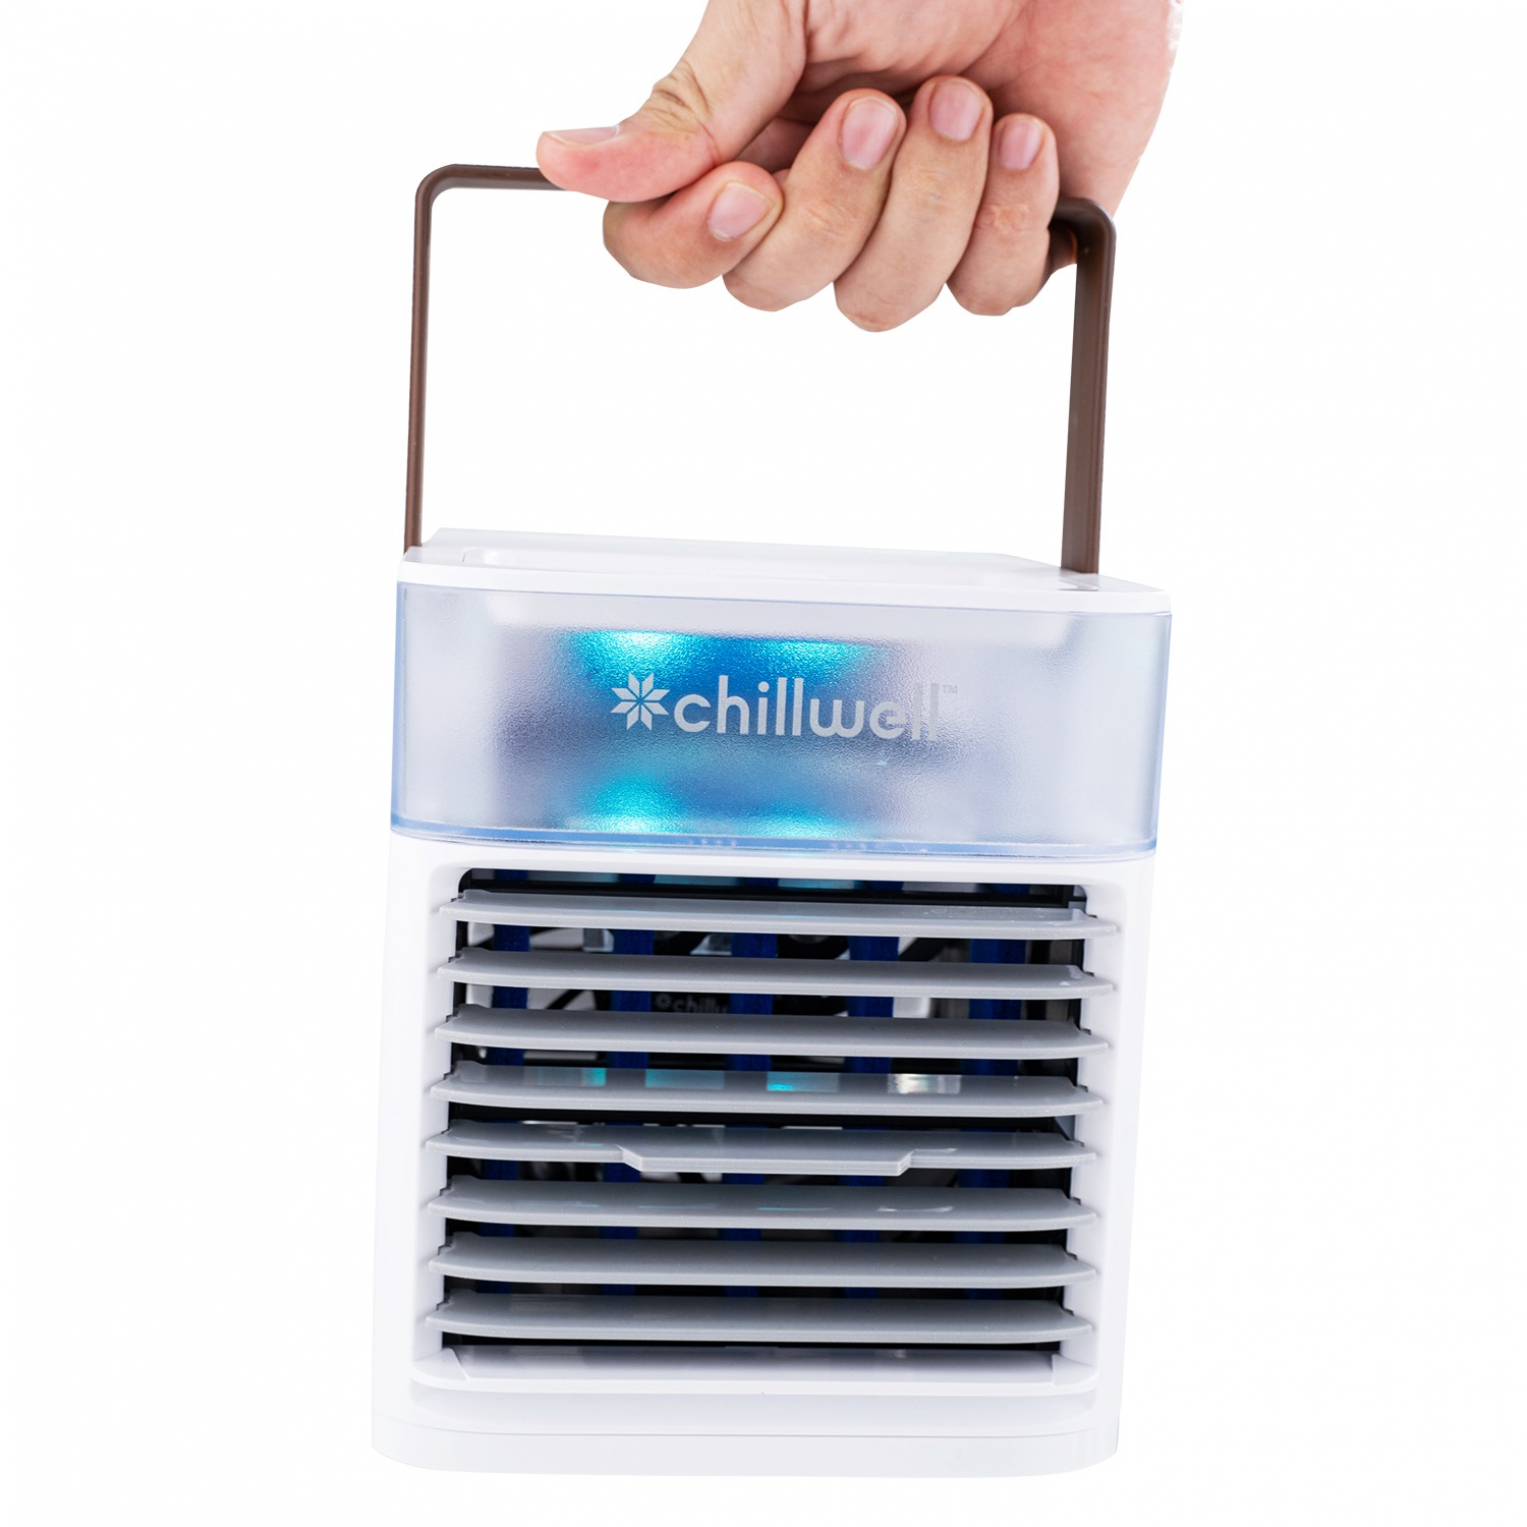 Chillwell AC Chill Review